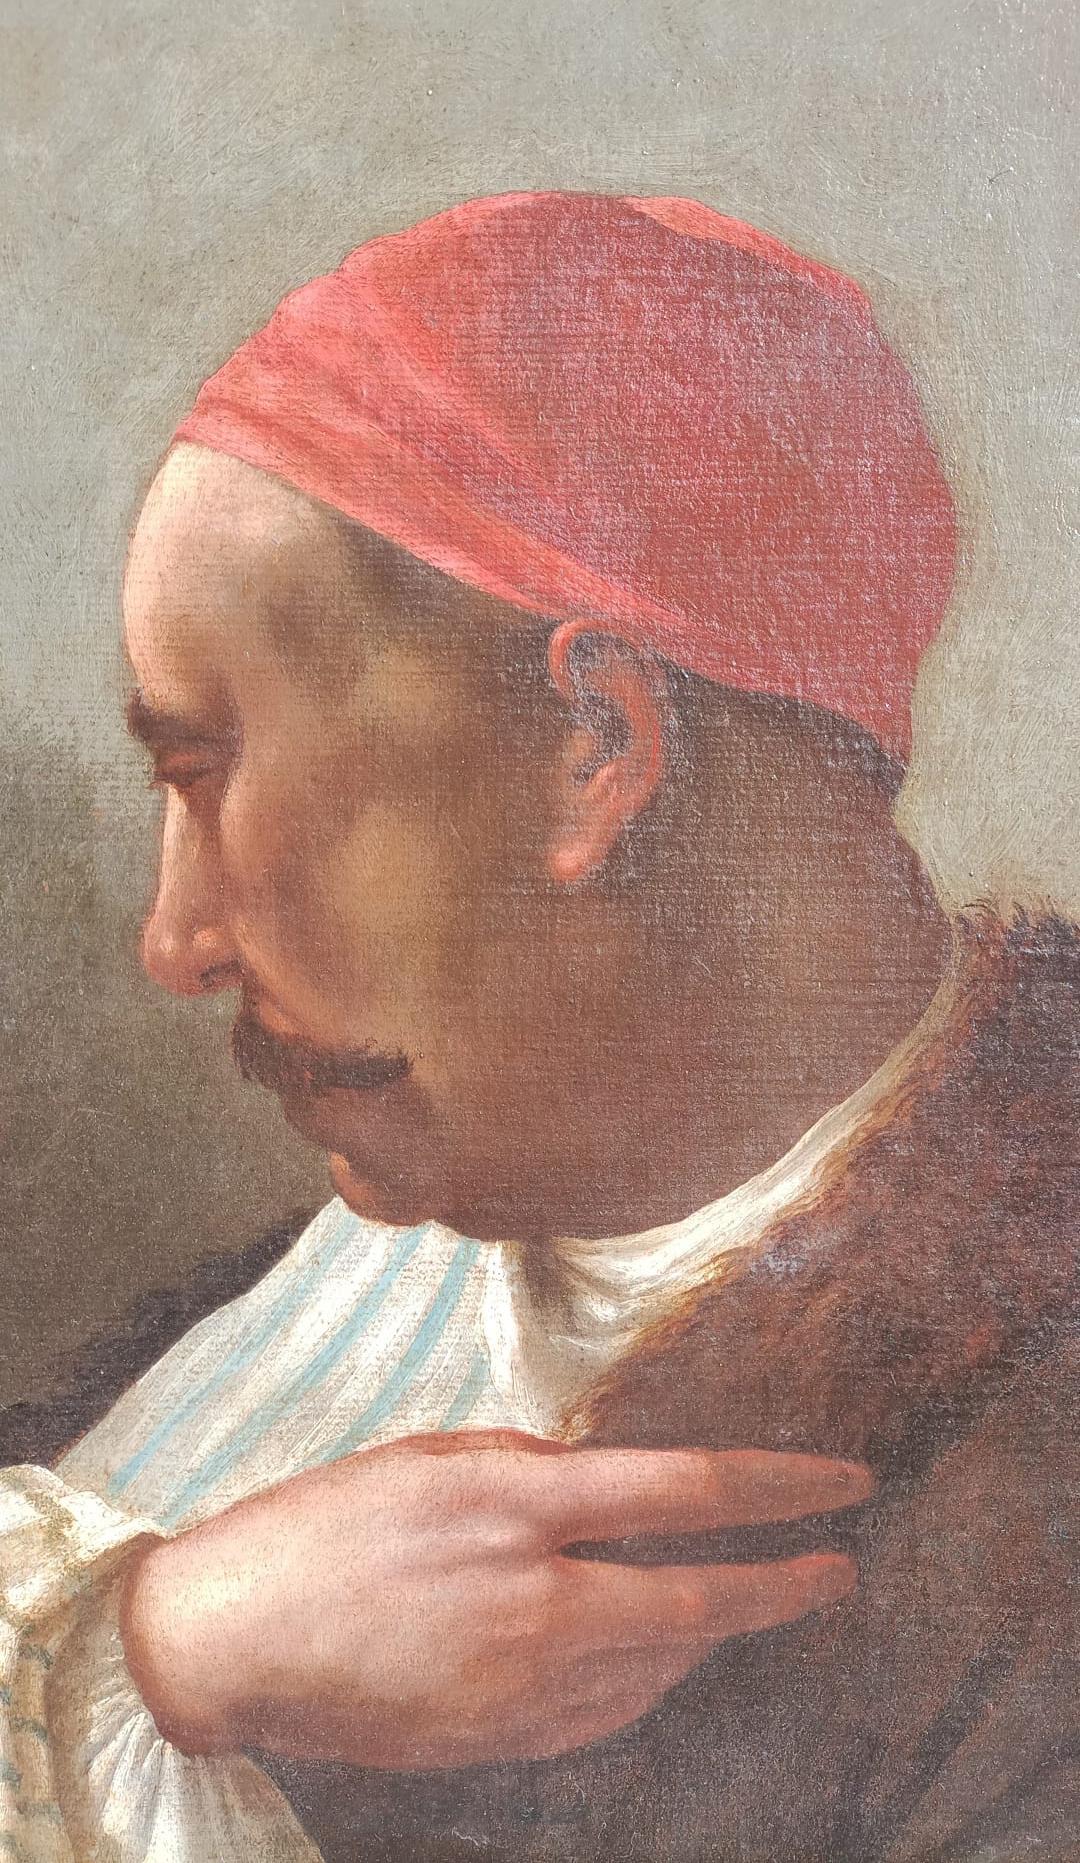 Oriental style portrait by Giuseppe Angeli (attr.) - XVIII century
This Oriental-style portrait of a man was attributed to the Italian Giuseppe Angeli (Venezia, 1709 – Venezia, 1798).
The original oil work was made on paper, and later transferred